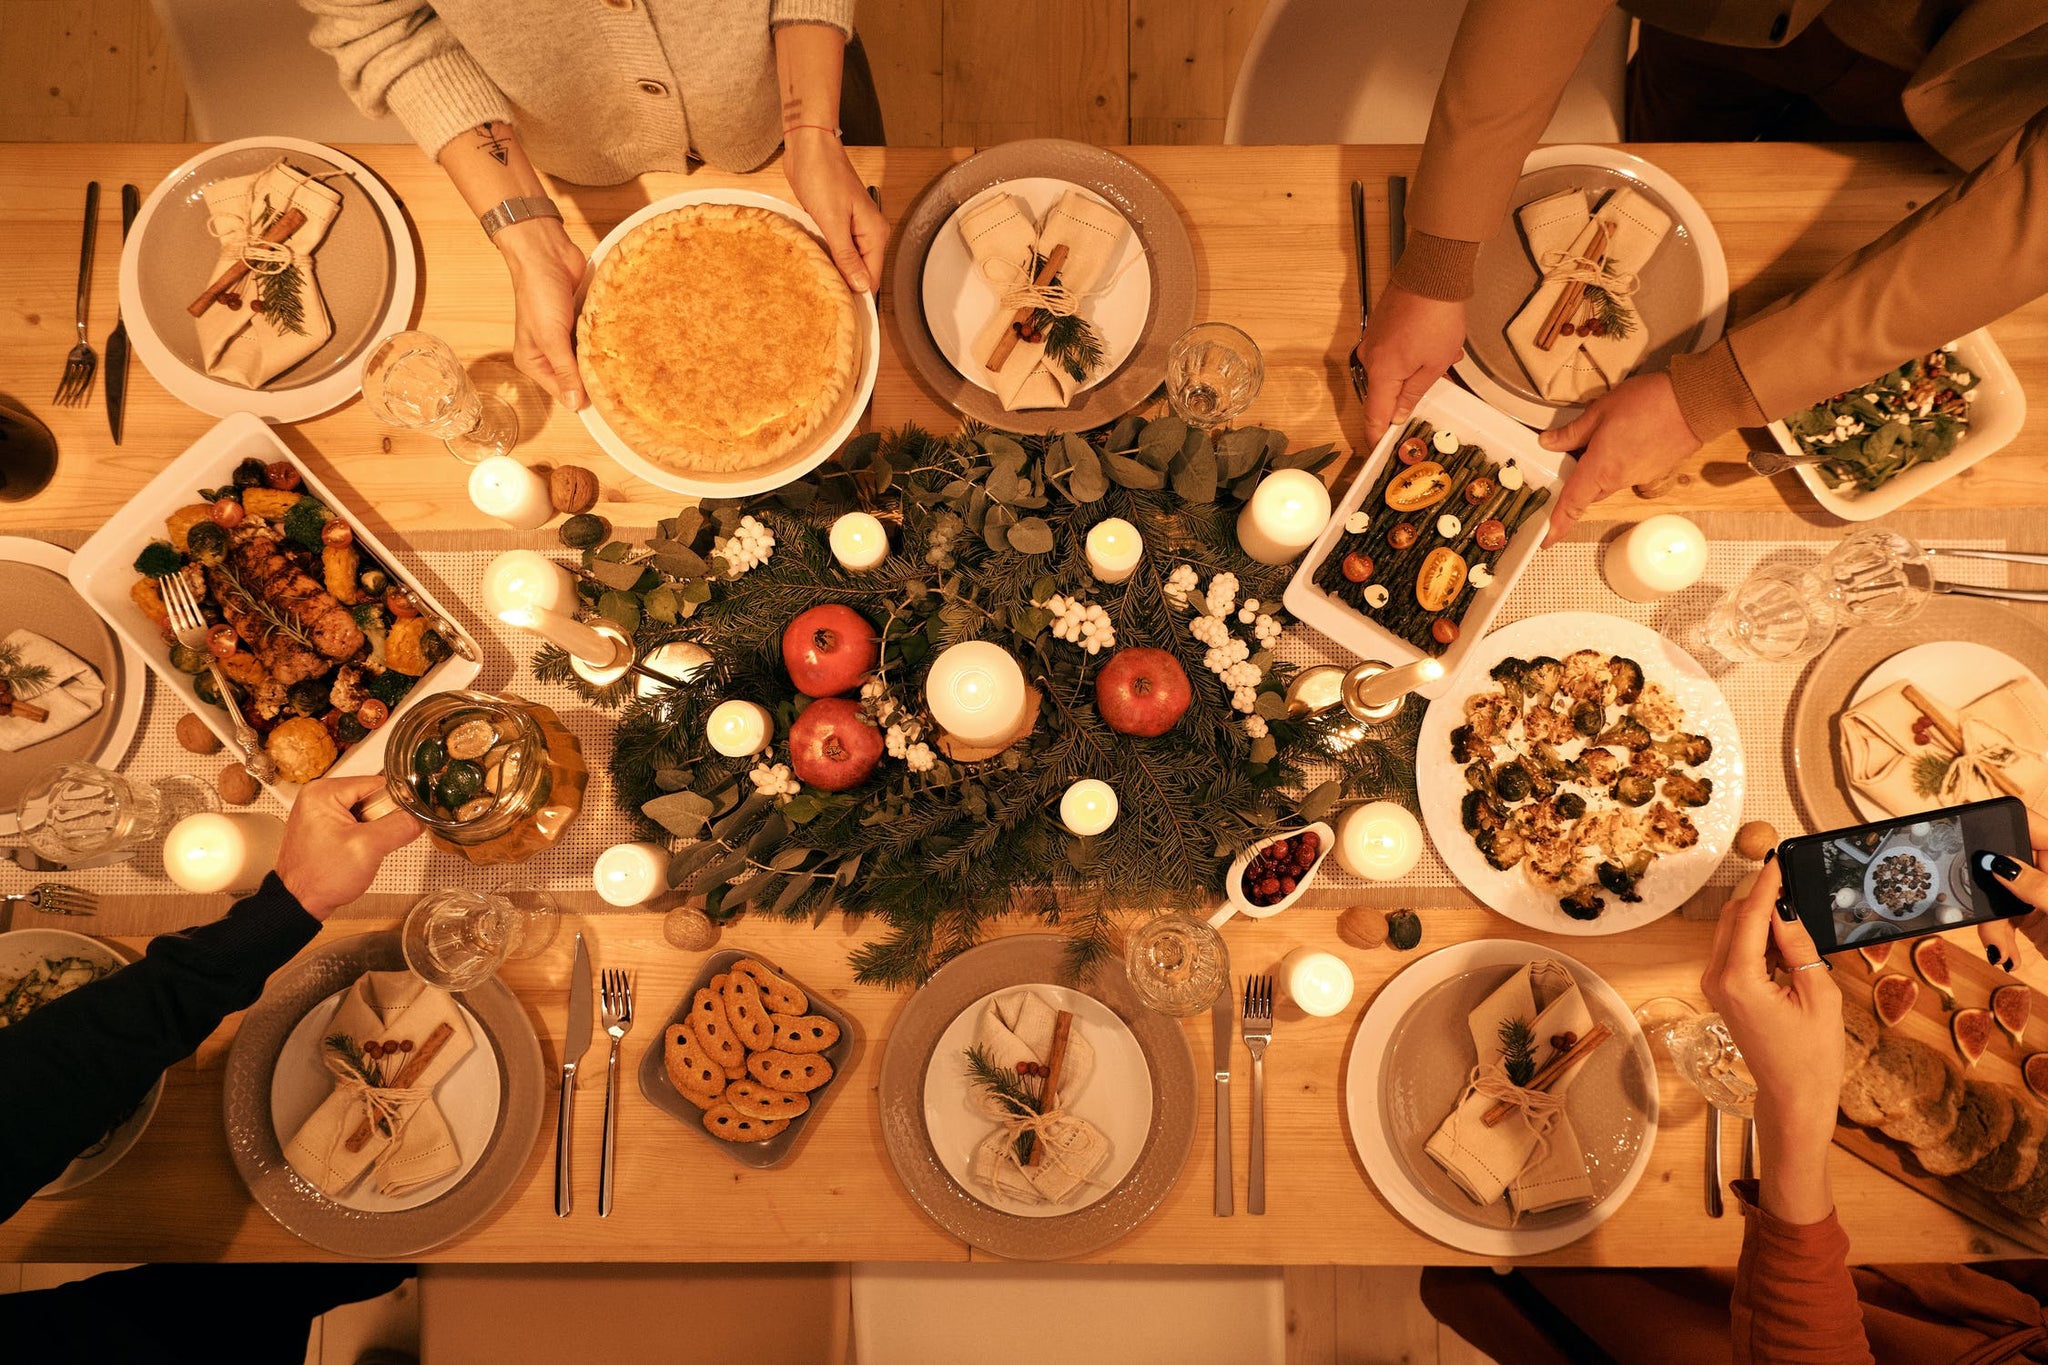 Hosting a memorable dinner party at your home